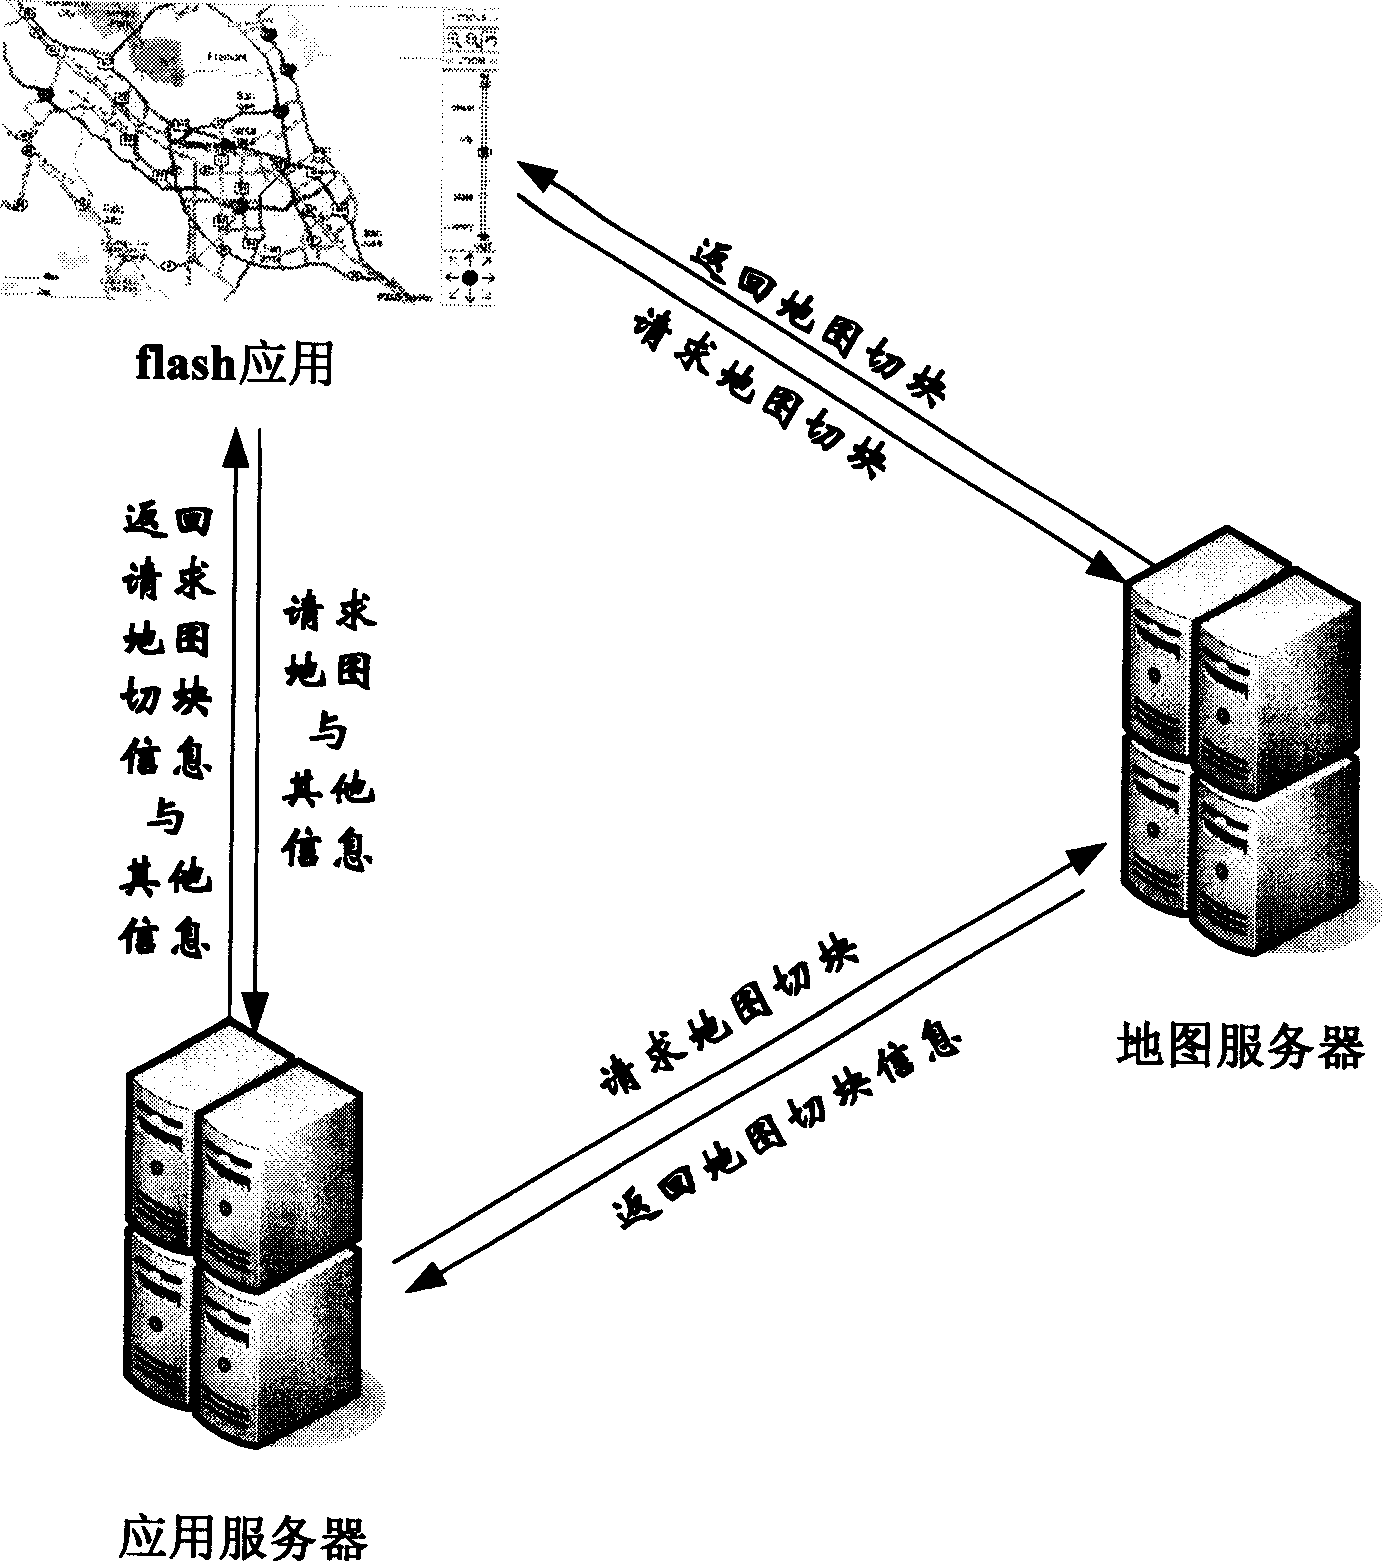 Computer electronic map formation and display method based on Flash technology